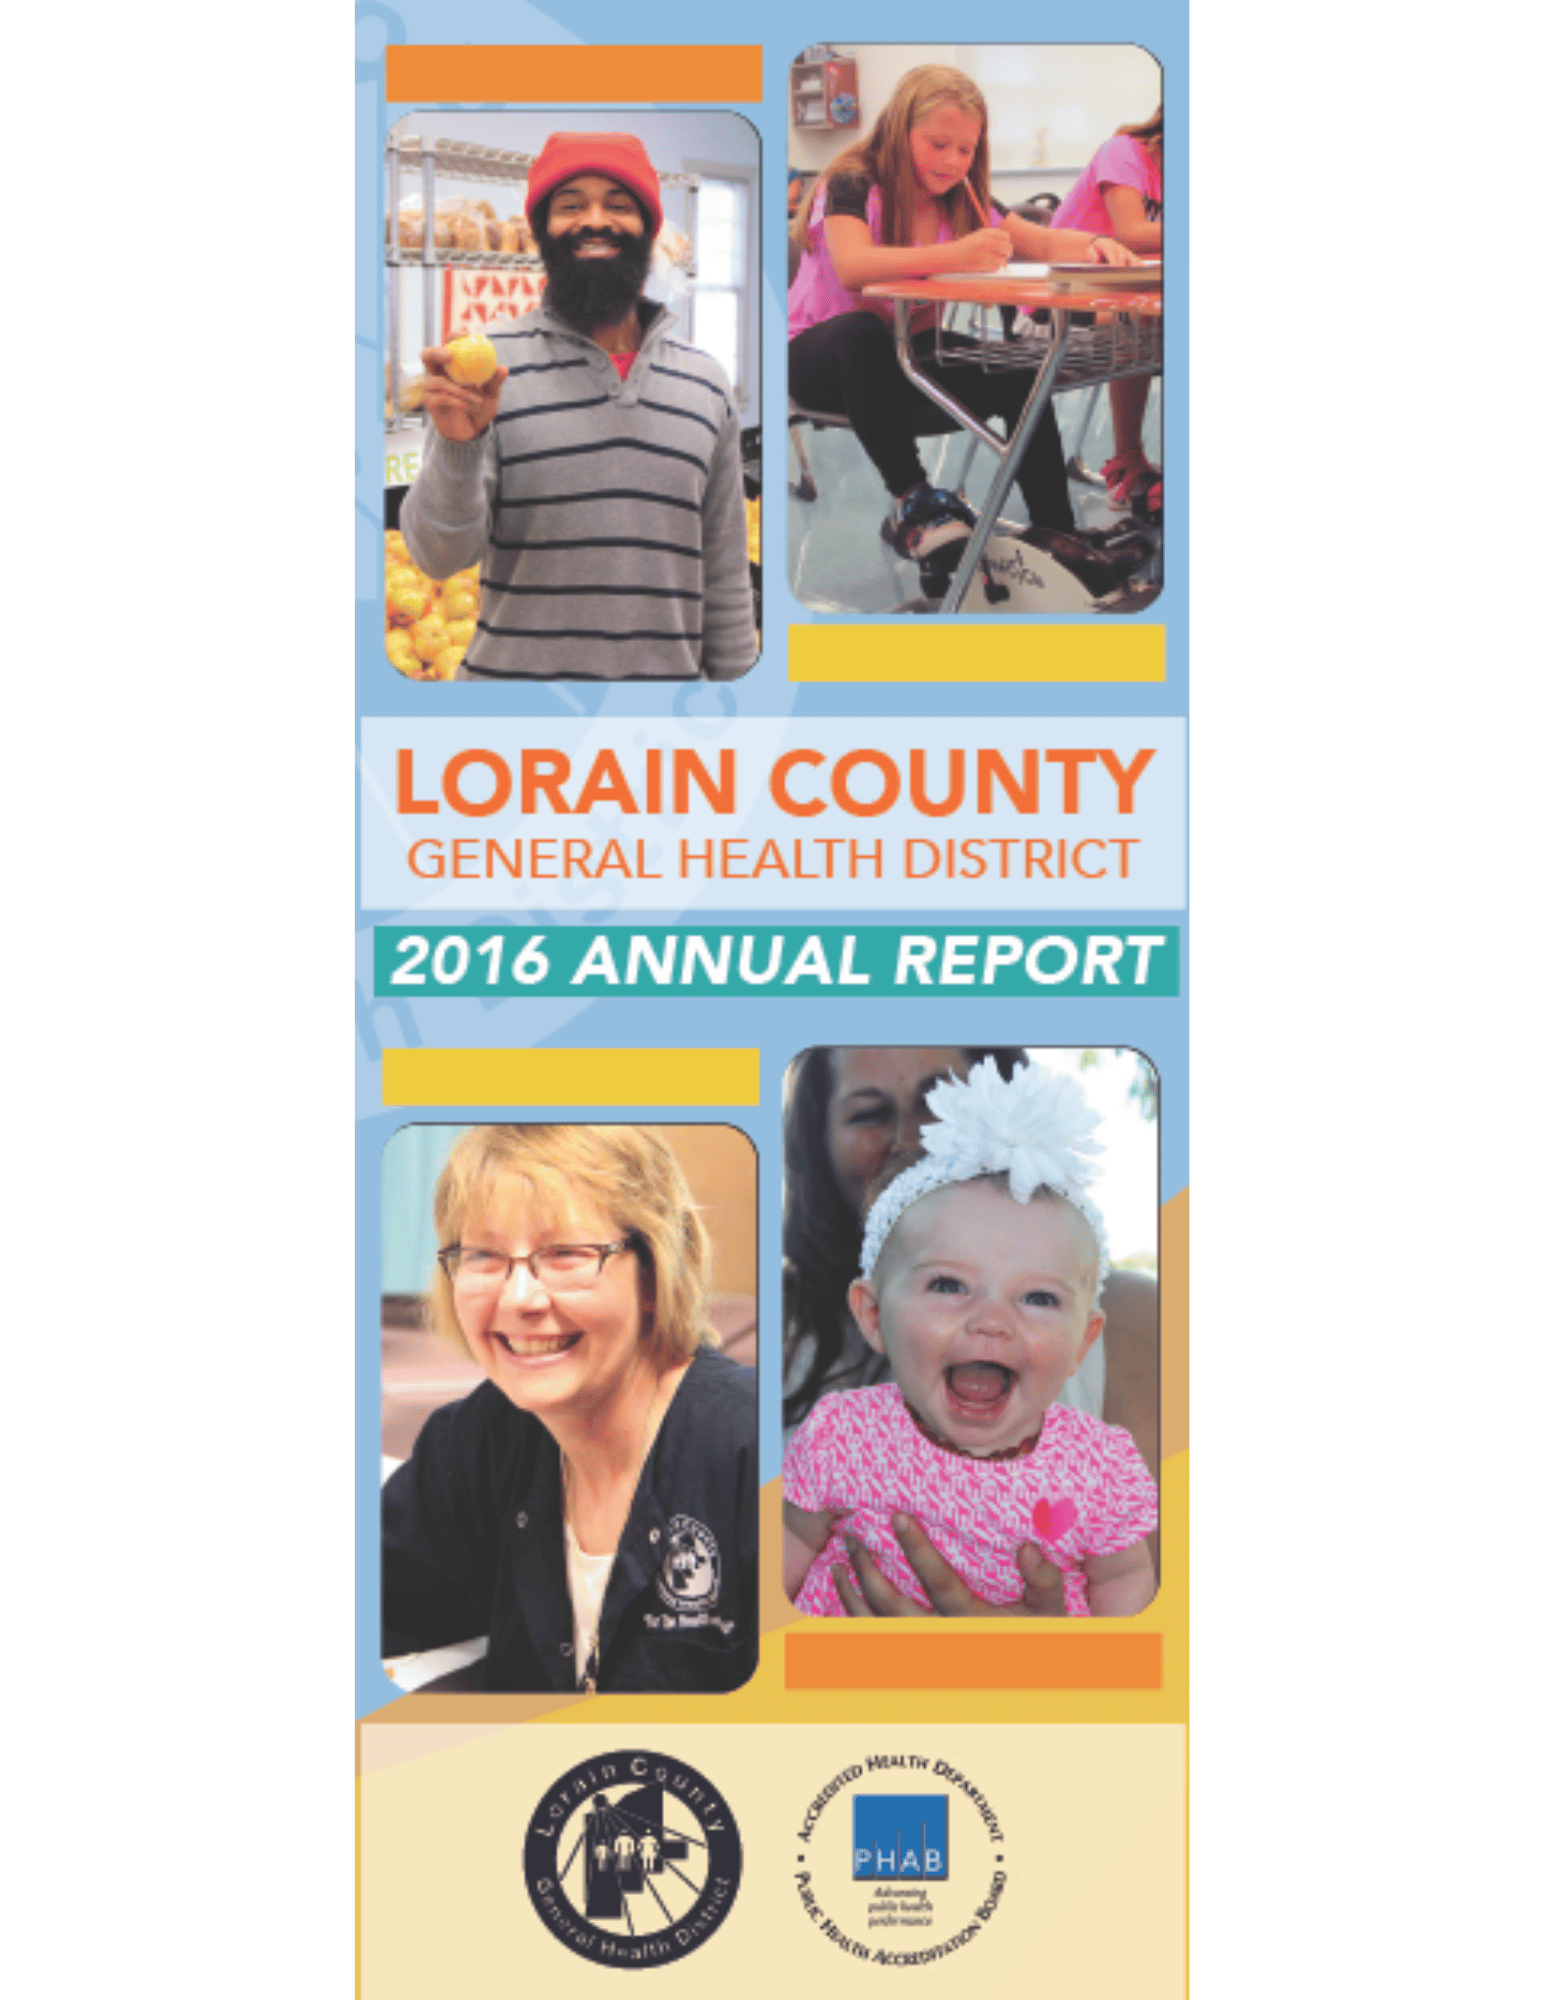 Title: Lorain County General Health District 2016 Annual Report. 4 photos of a man holding up an apple, a girl using a desk cycle, a nurse smiling, and a baby smiling.